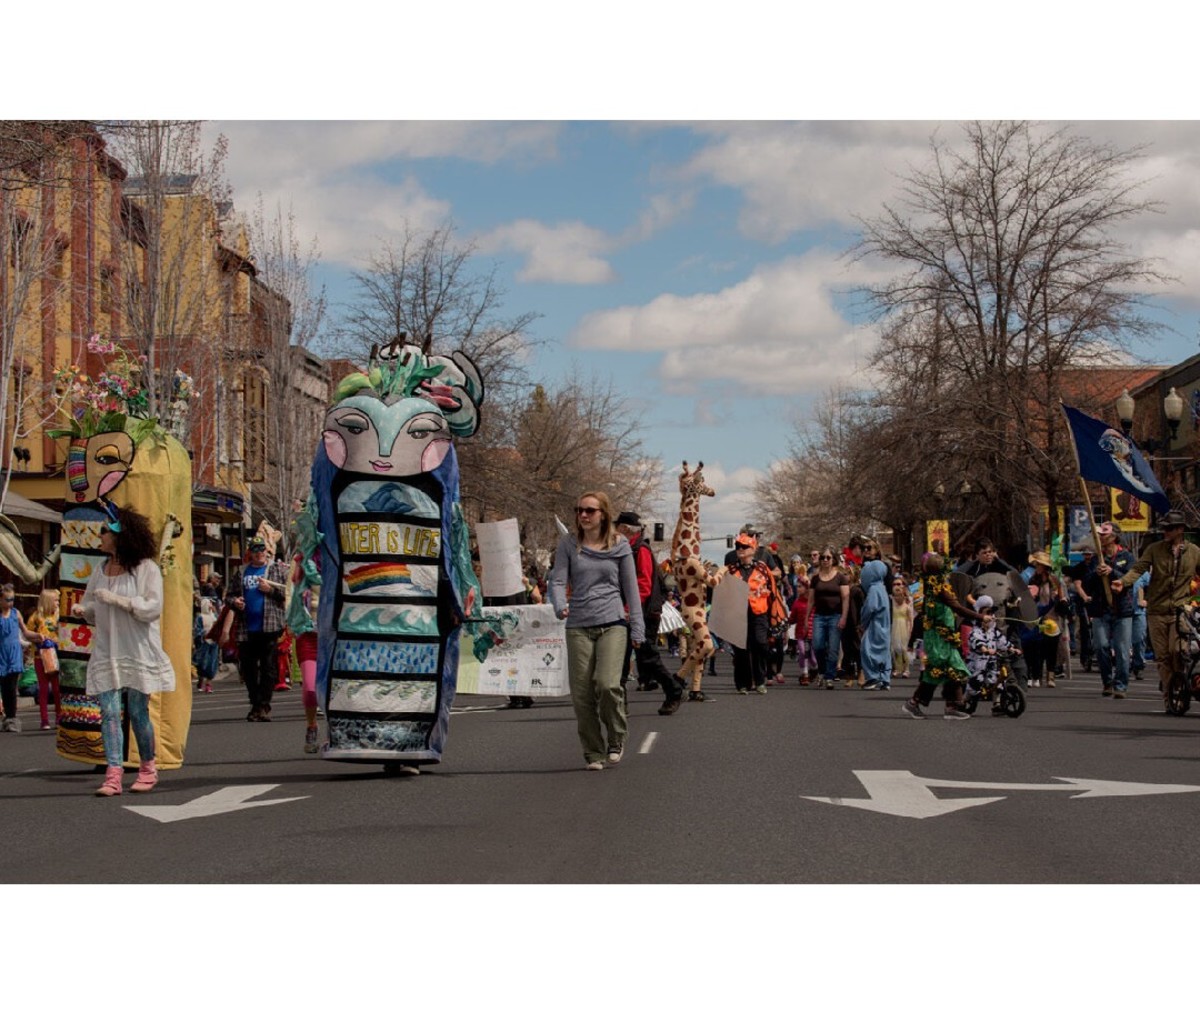 Families parading down the street in downtown Bend, OR, during Earth Day Fair & Parade